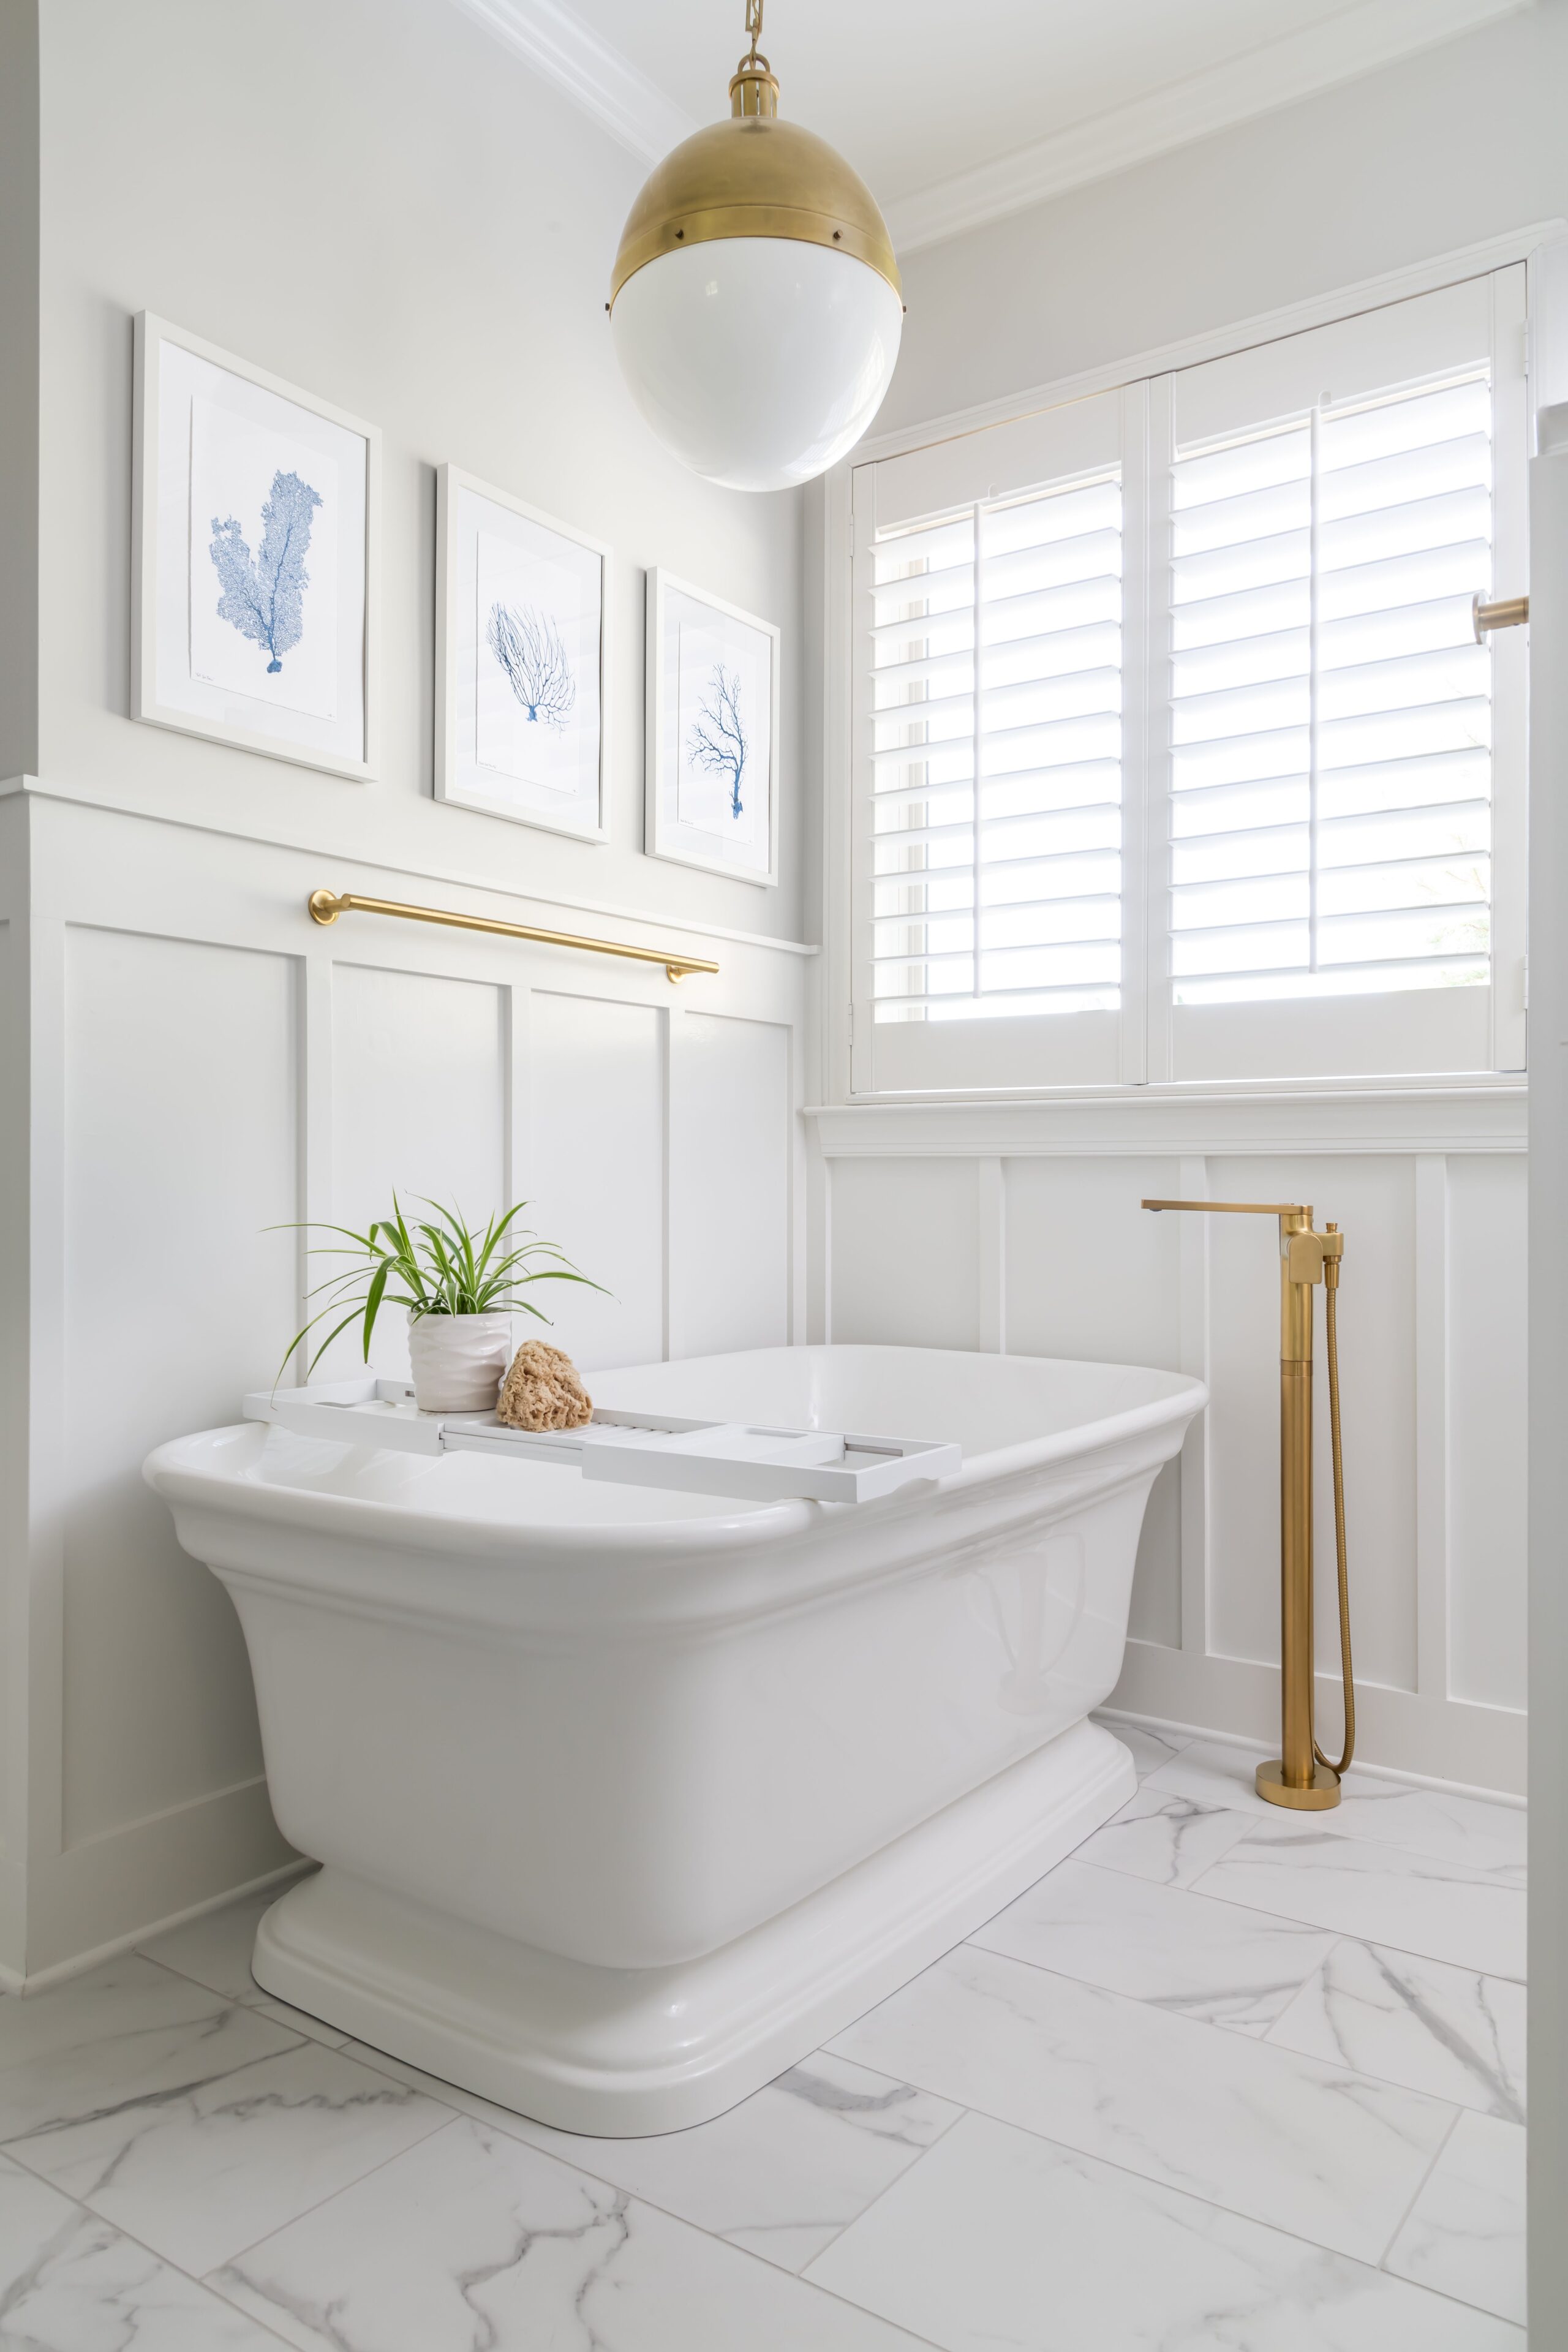 a white bath tub sitting under a window with decor items on the wall